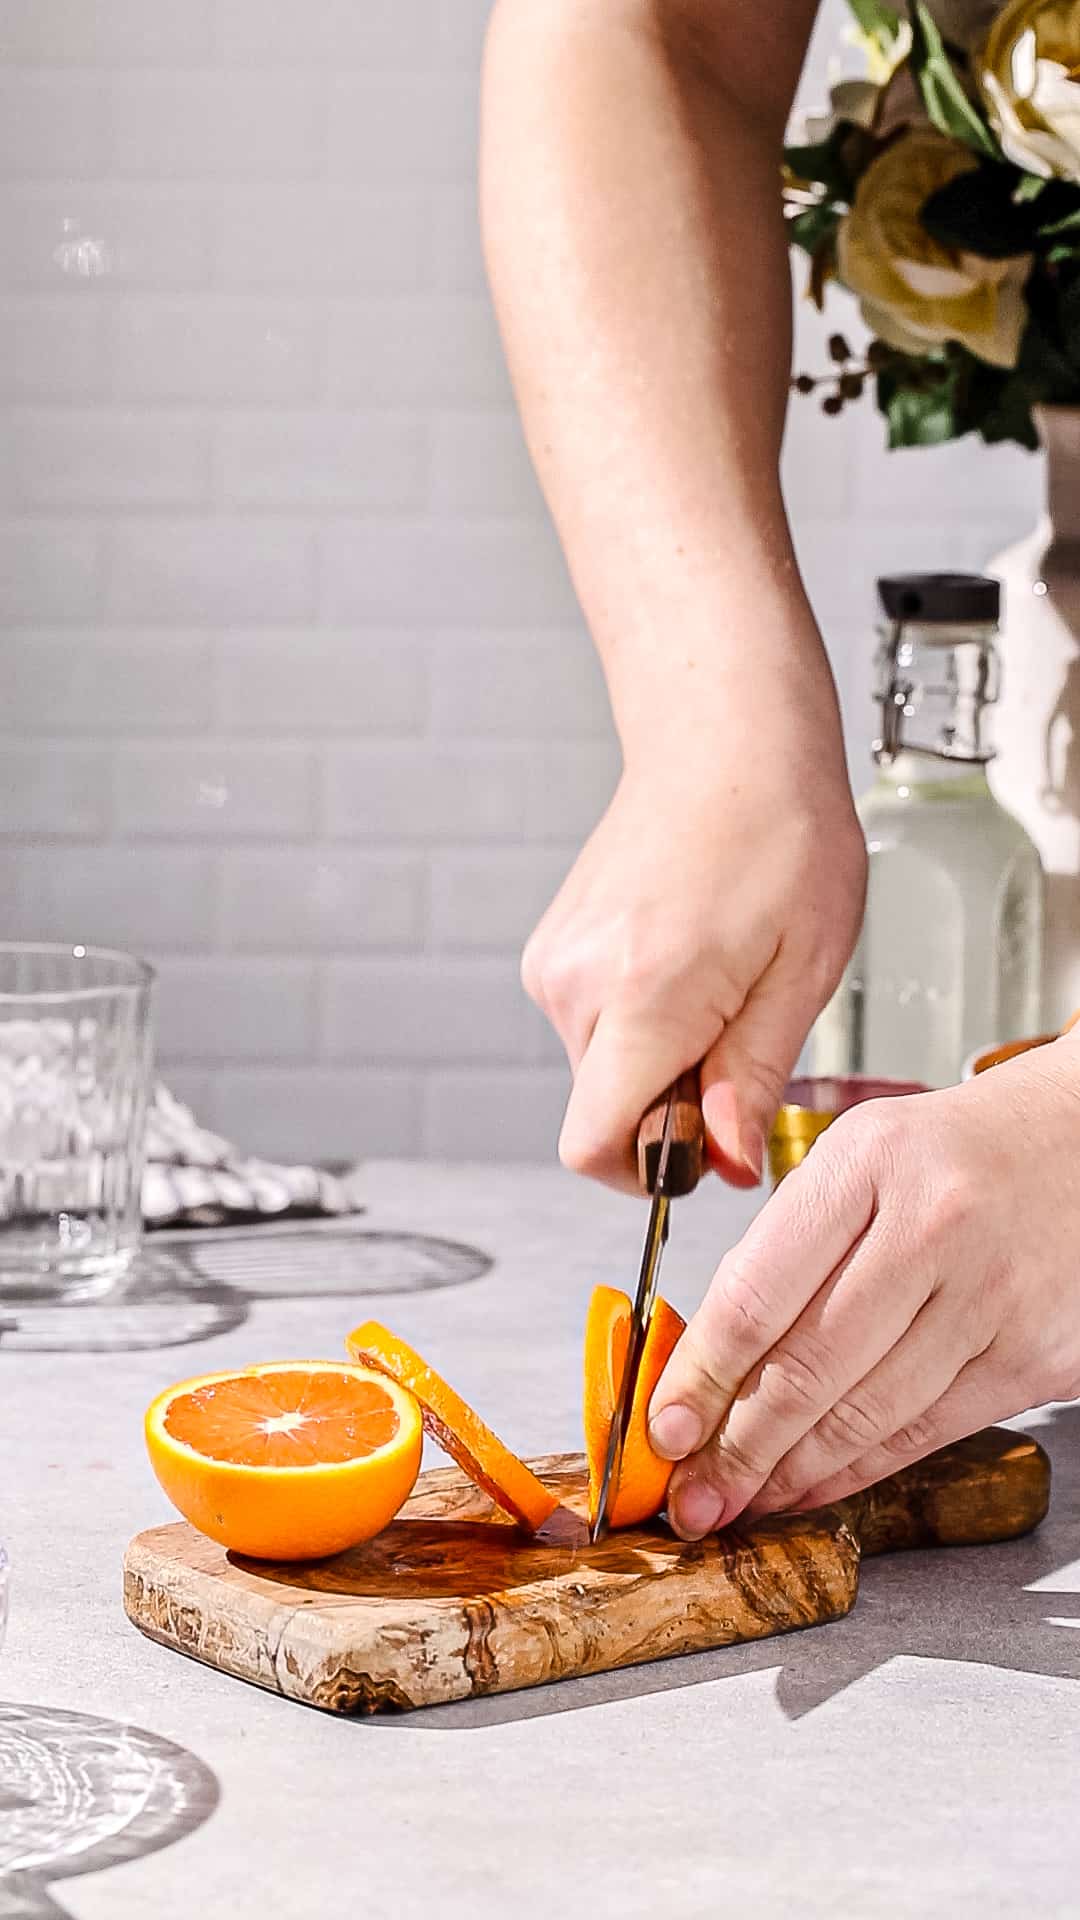 Hands cutting an orange into slices using a knife and cutting board.